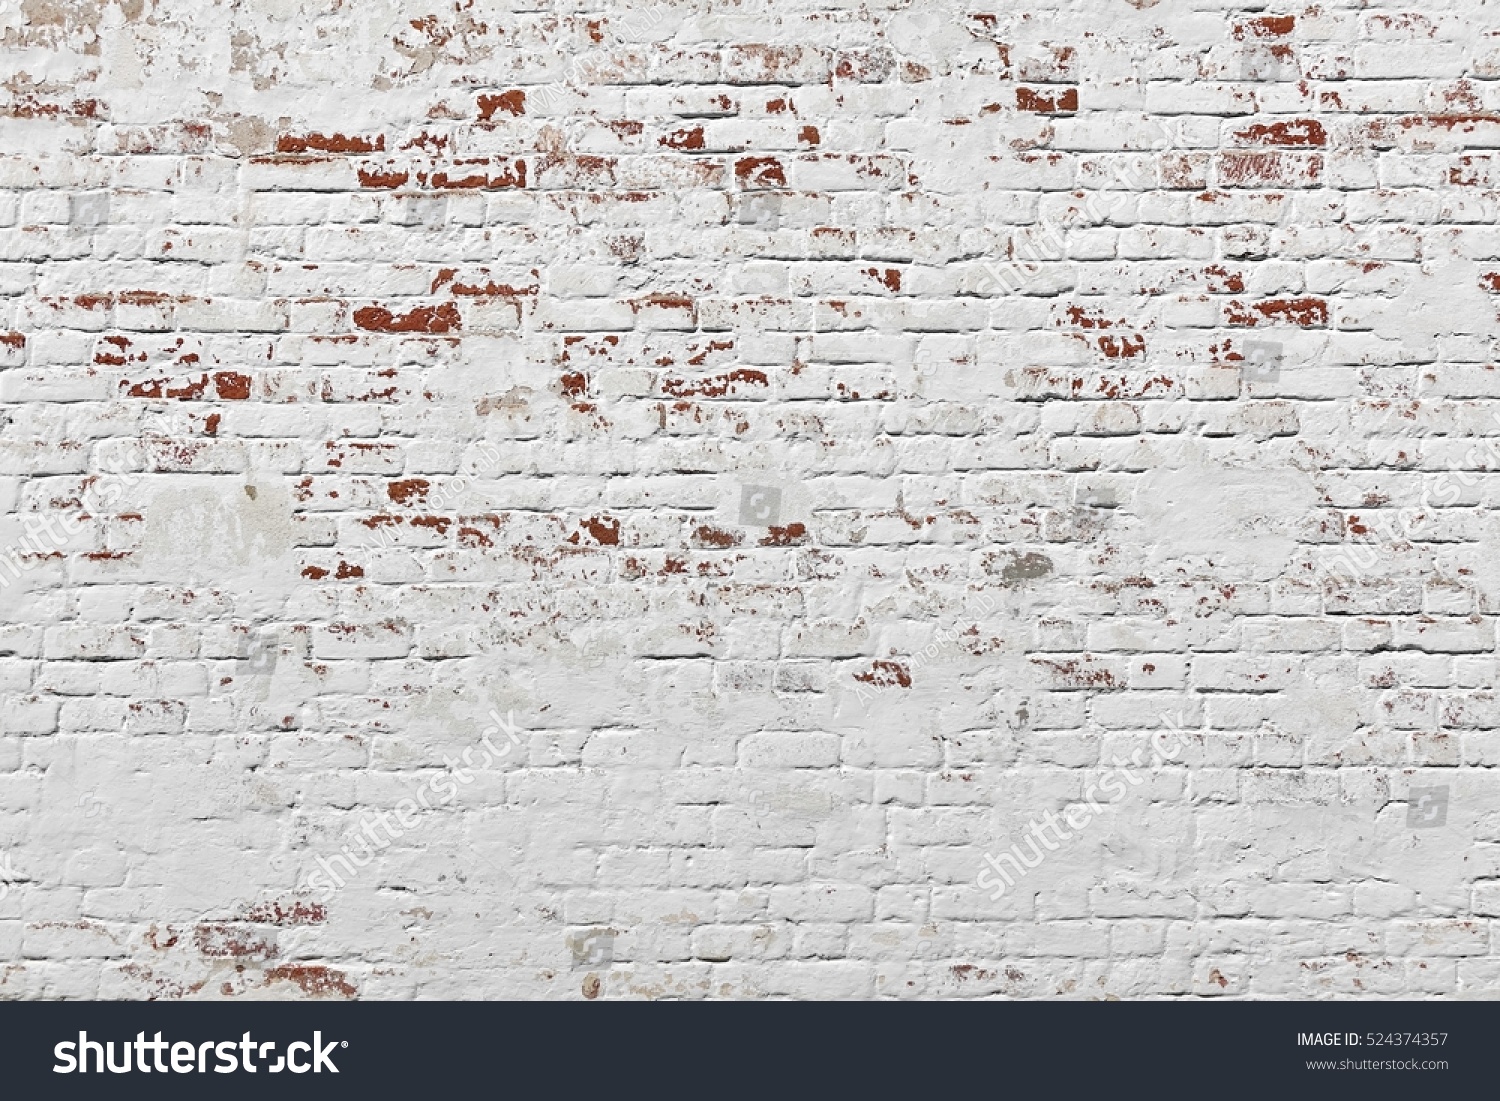 Red White Wall Background. Old Grungy Brick Wall Horizontal Texture. Brickwall Backdrop. Stonewall Wallpaper. Vintage Wall With Peeled Plaster. Retro Grunge Wall. Brick Wall With White Uneven Stucco #524374357